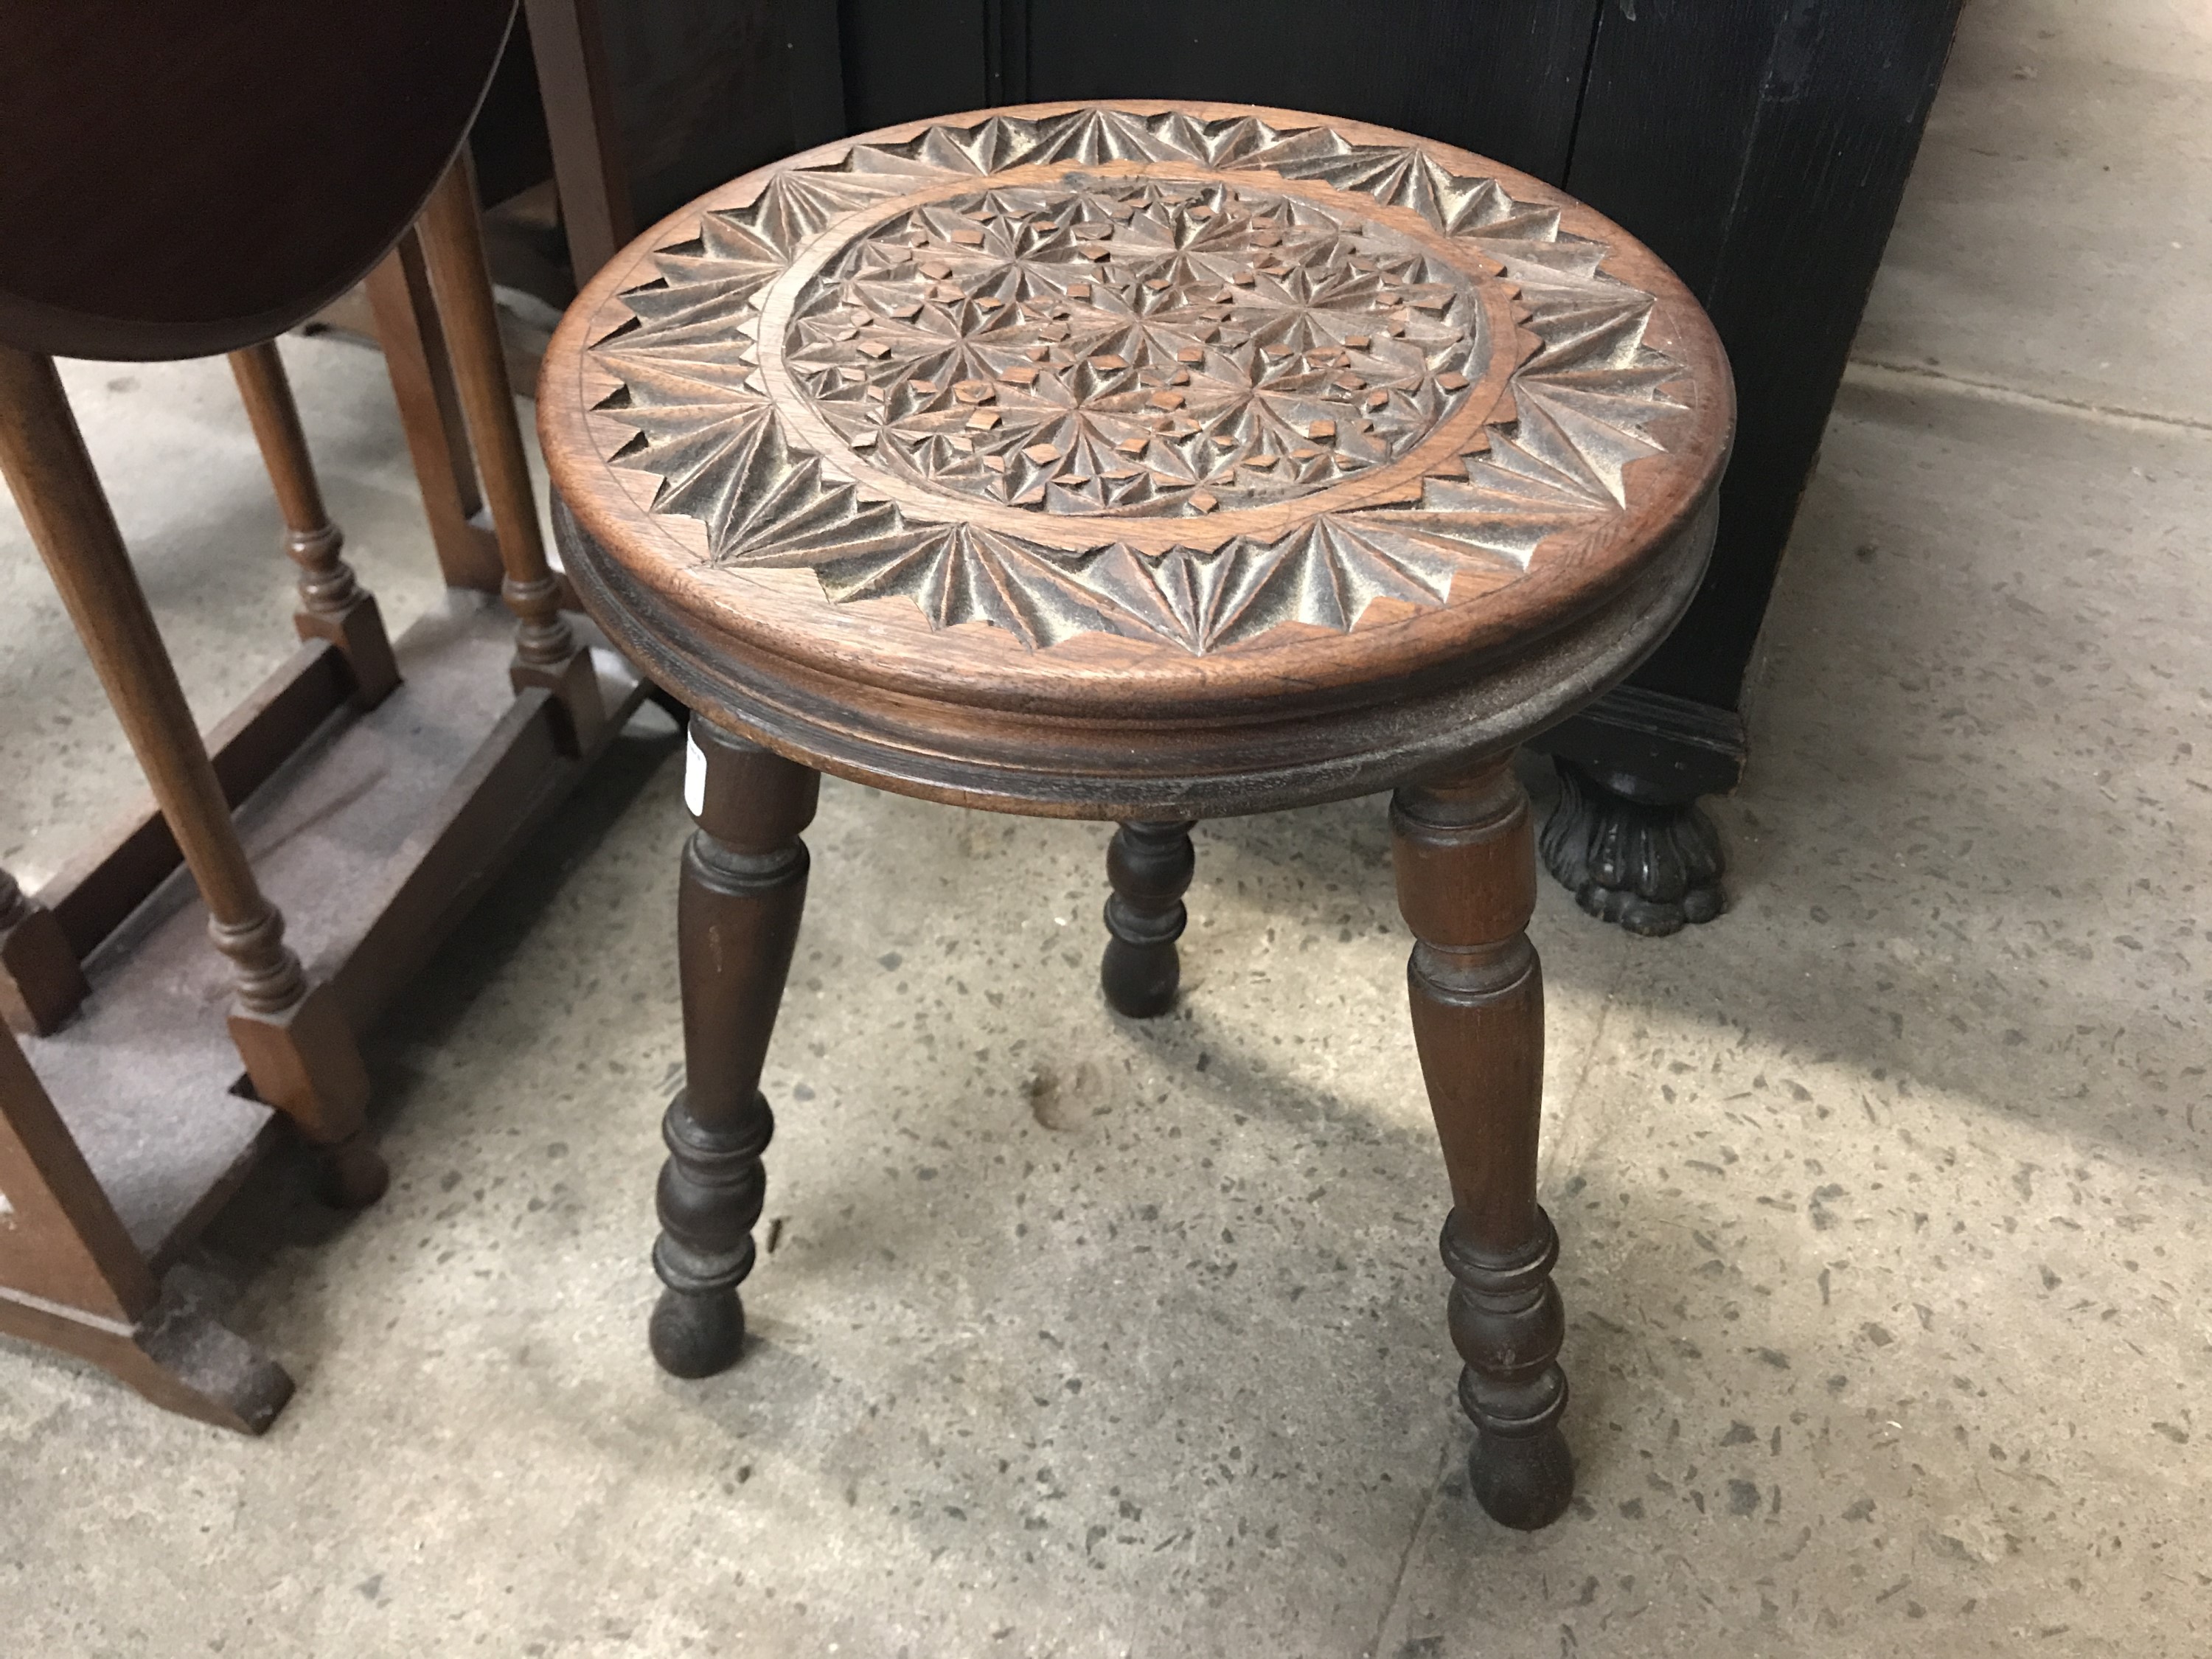 A Victorian chip-carved stool